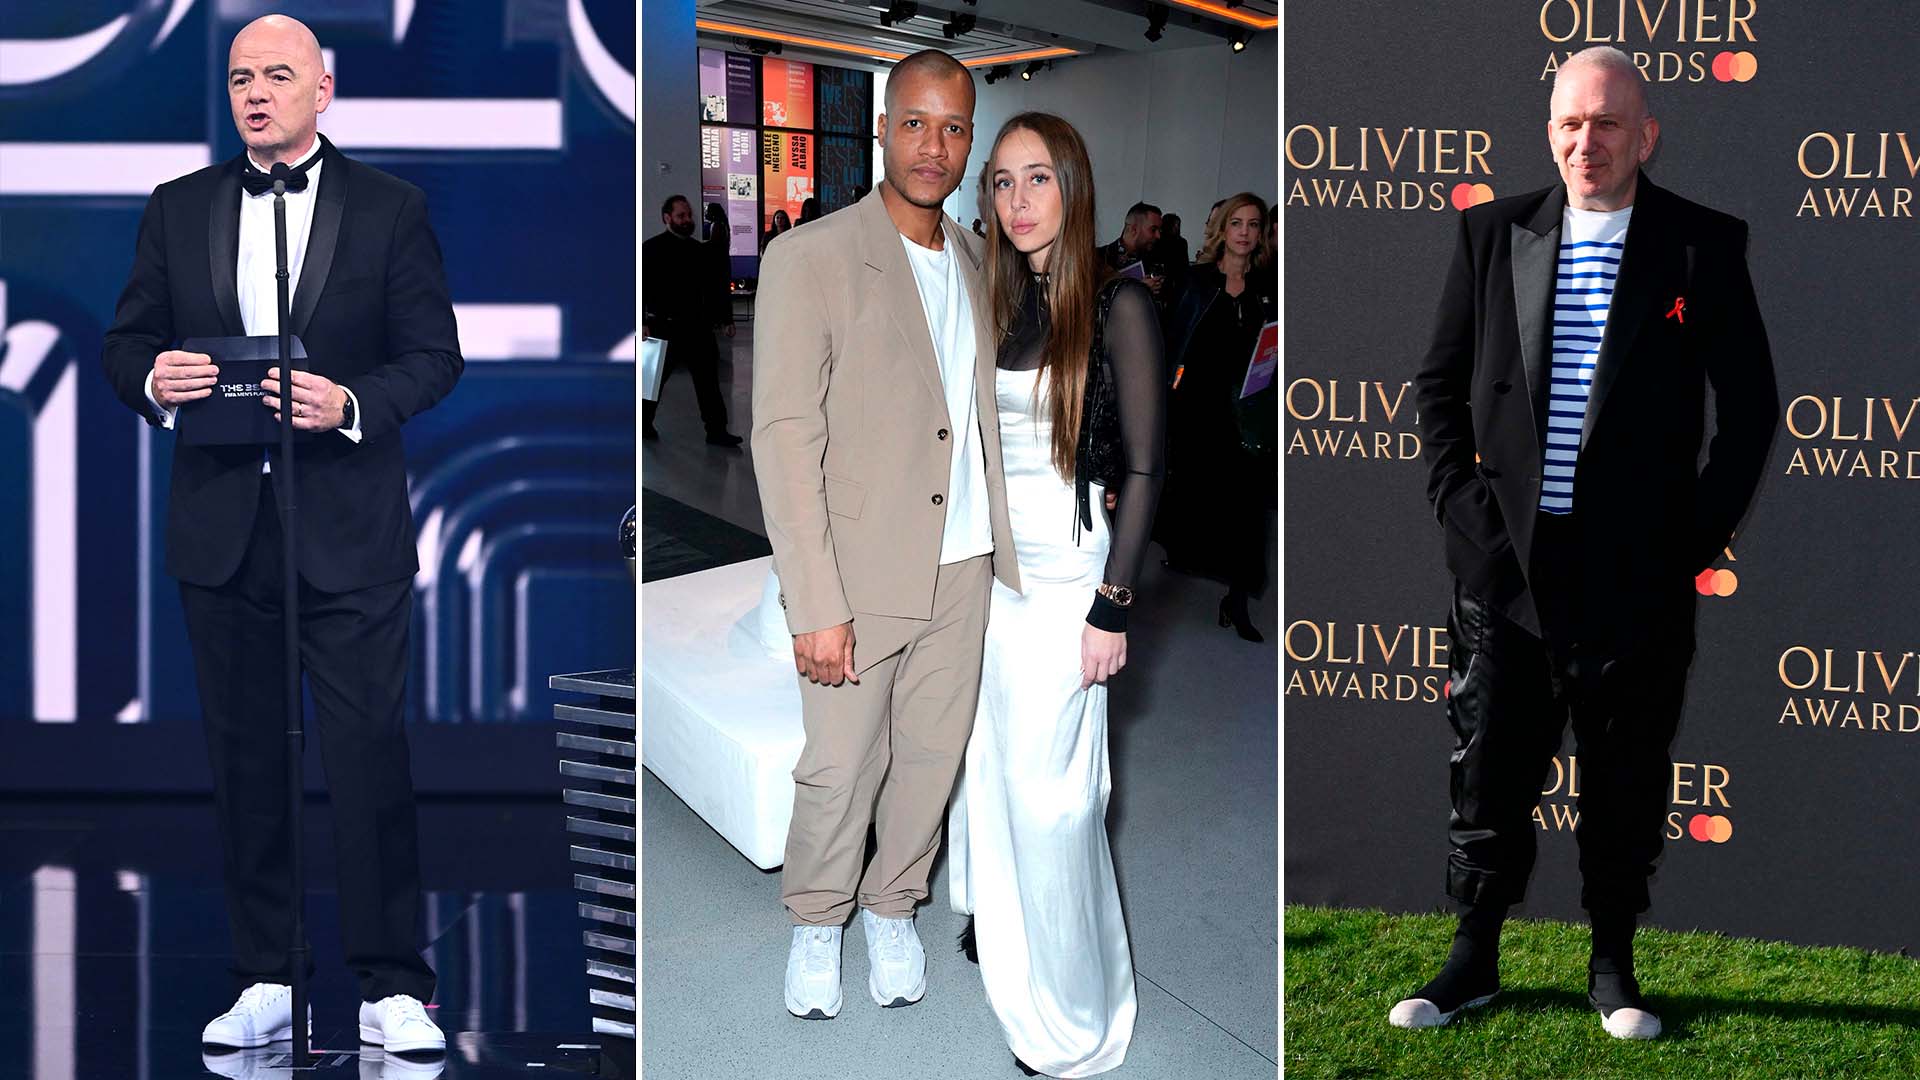 From Infantino to Armani, celebrities are choosing more and more suits and sneakers to go to events